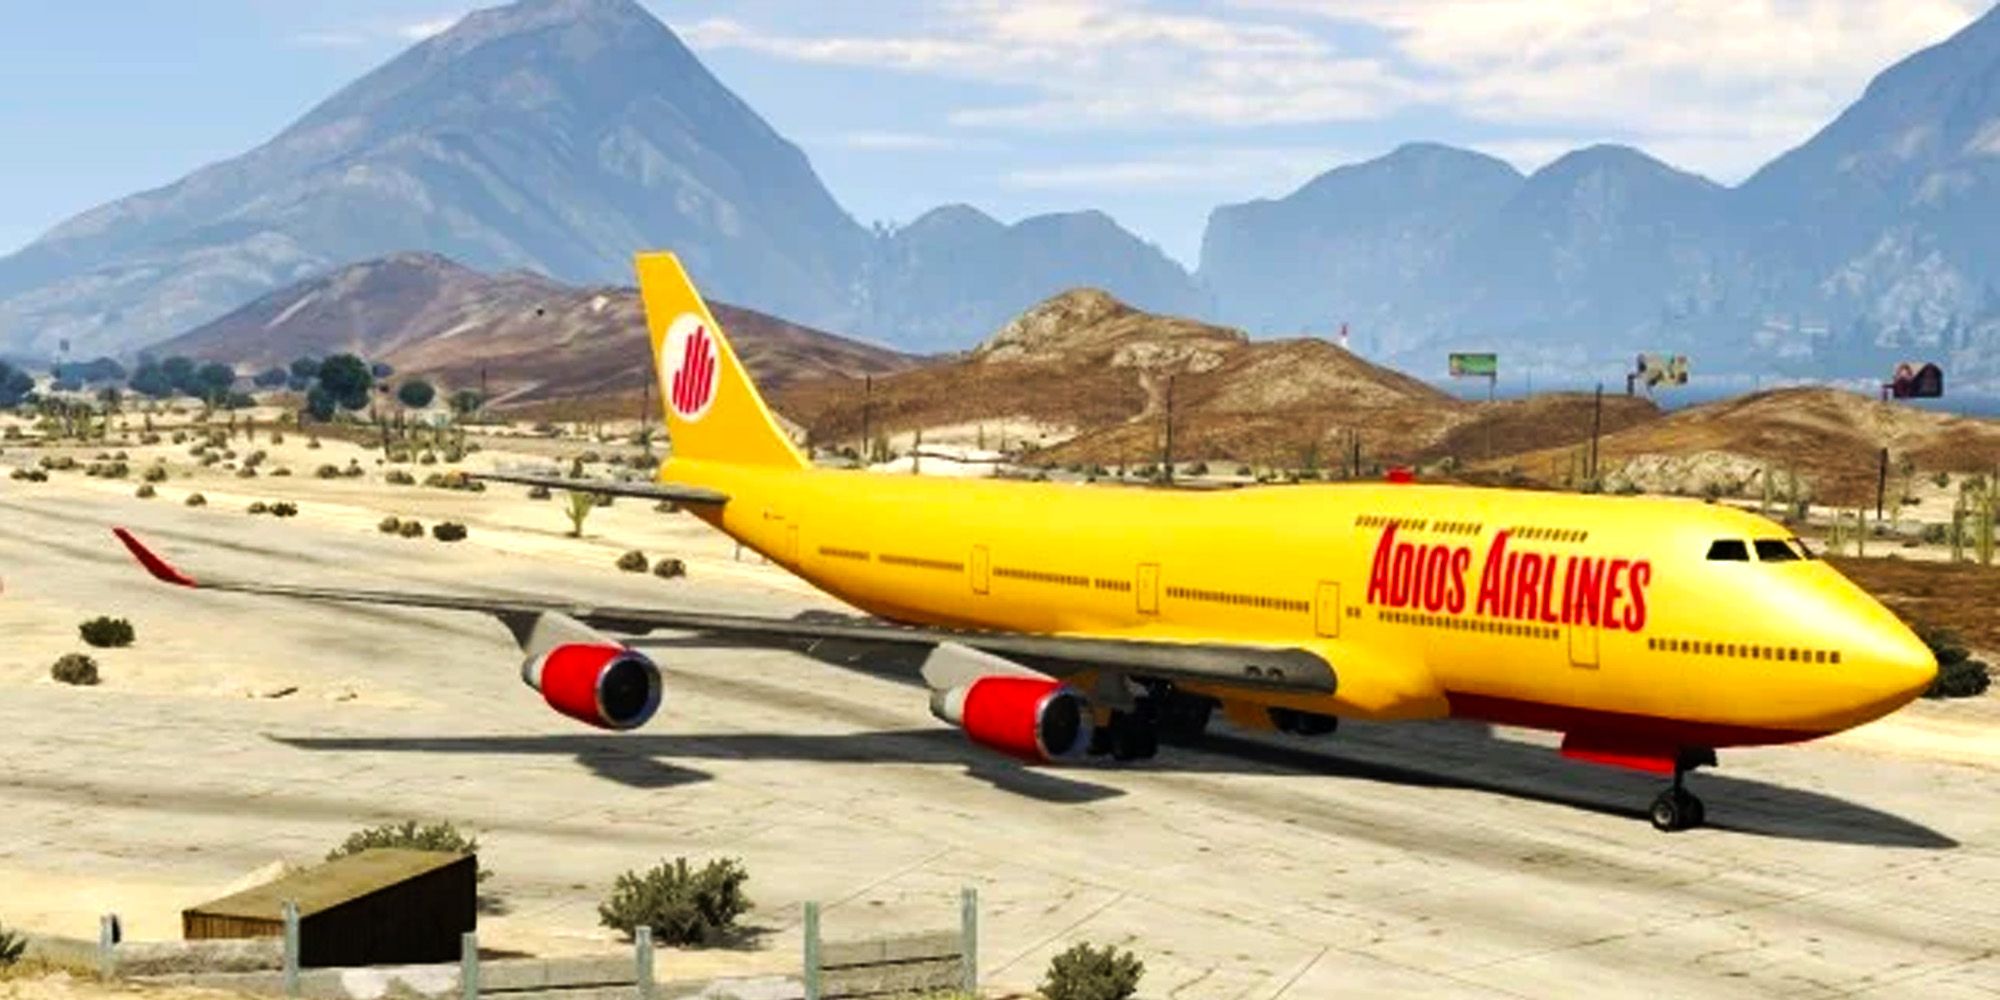 GTA 6 brands that will see the return of Adios Airlines